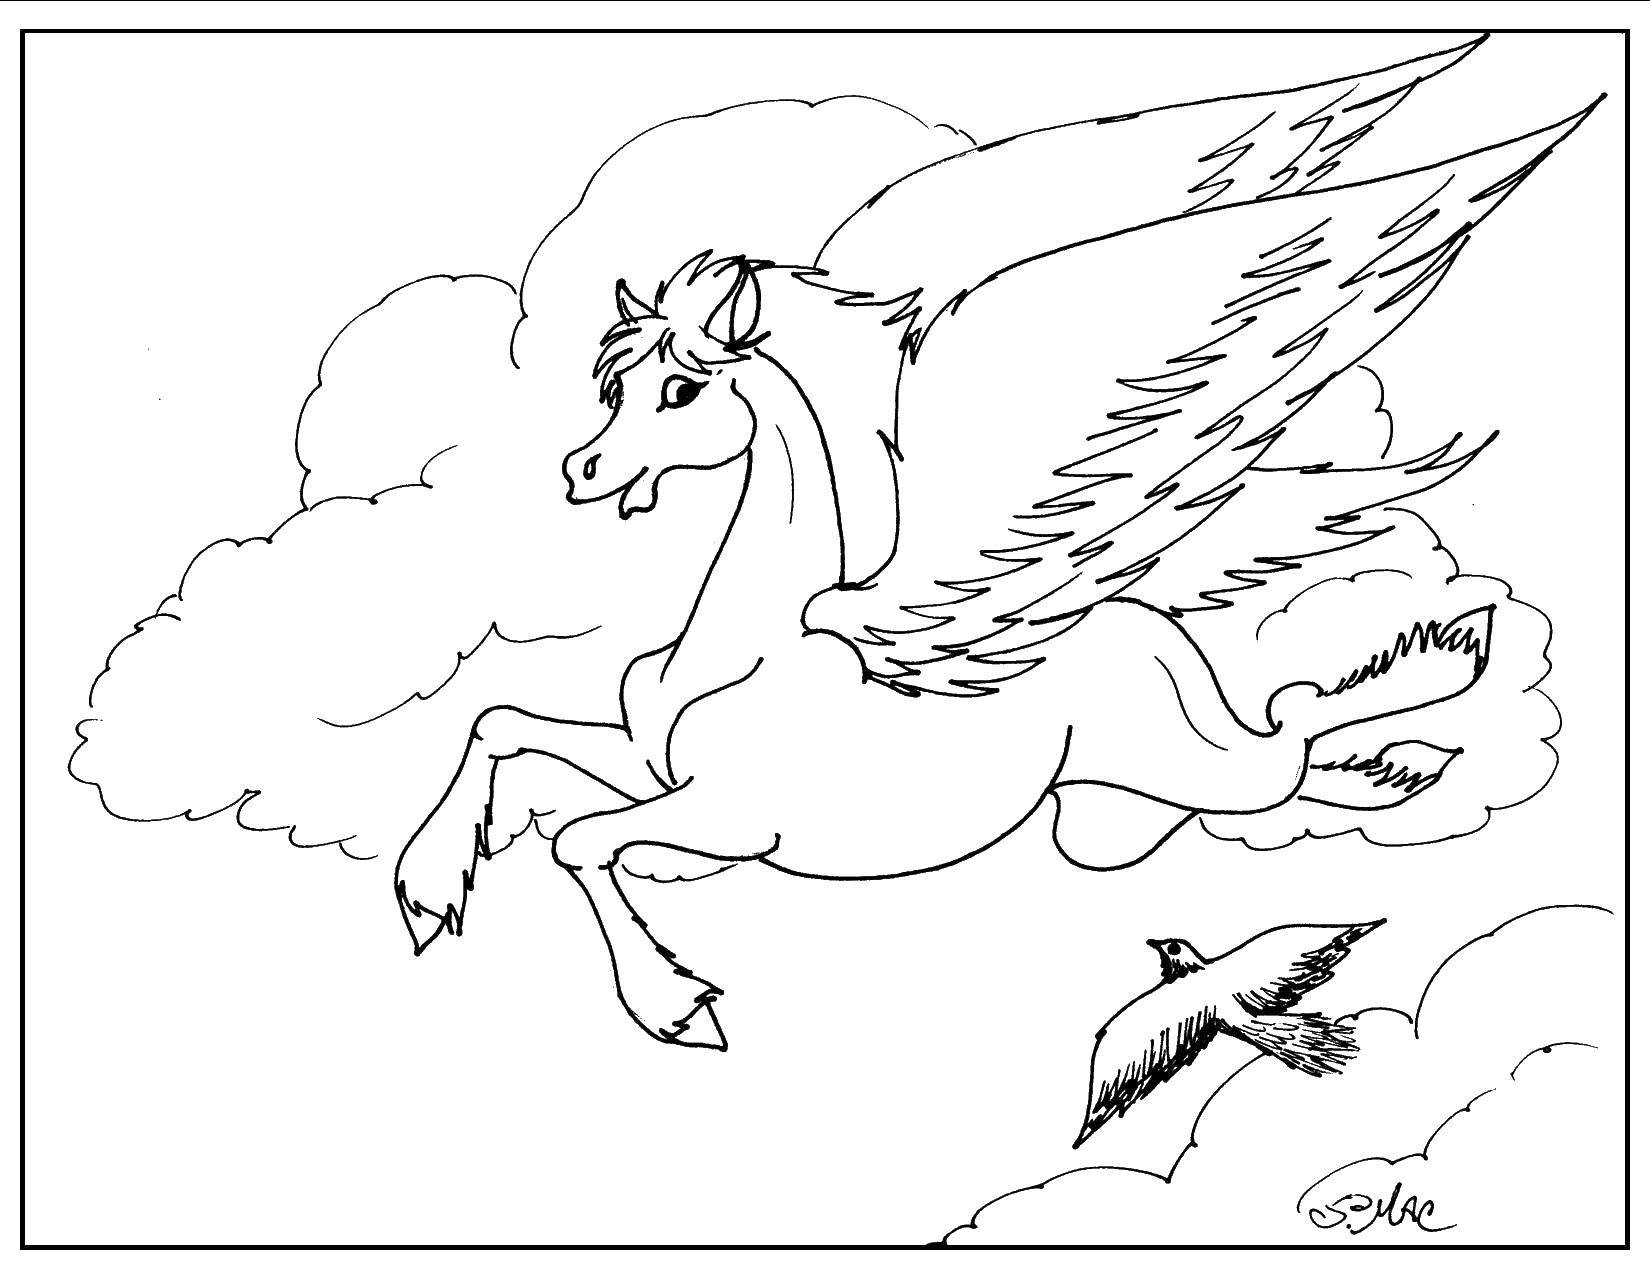 Coloring Pegasus. Category coloring. Tags:  the horse, wings, bird.